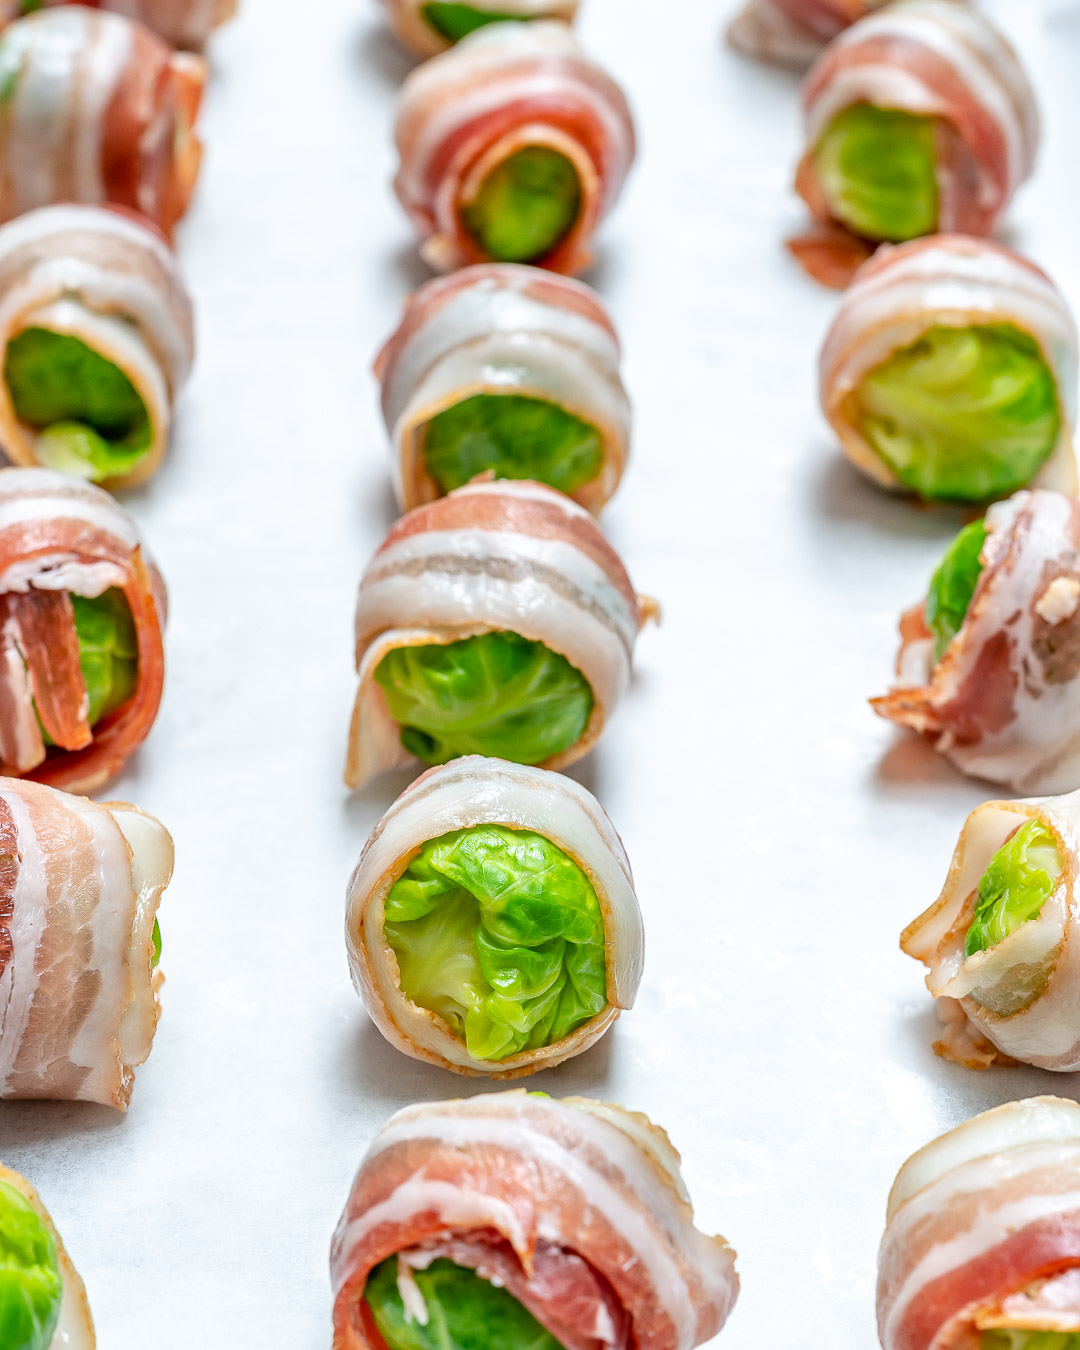 Bacon Wrapped Brussels Sprouts for a Super Fun Appetizer! | Clean Food ...